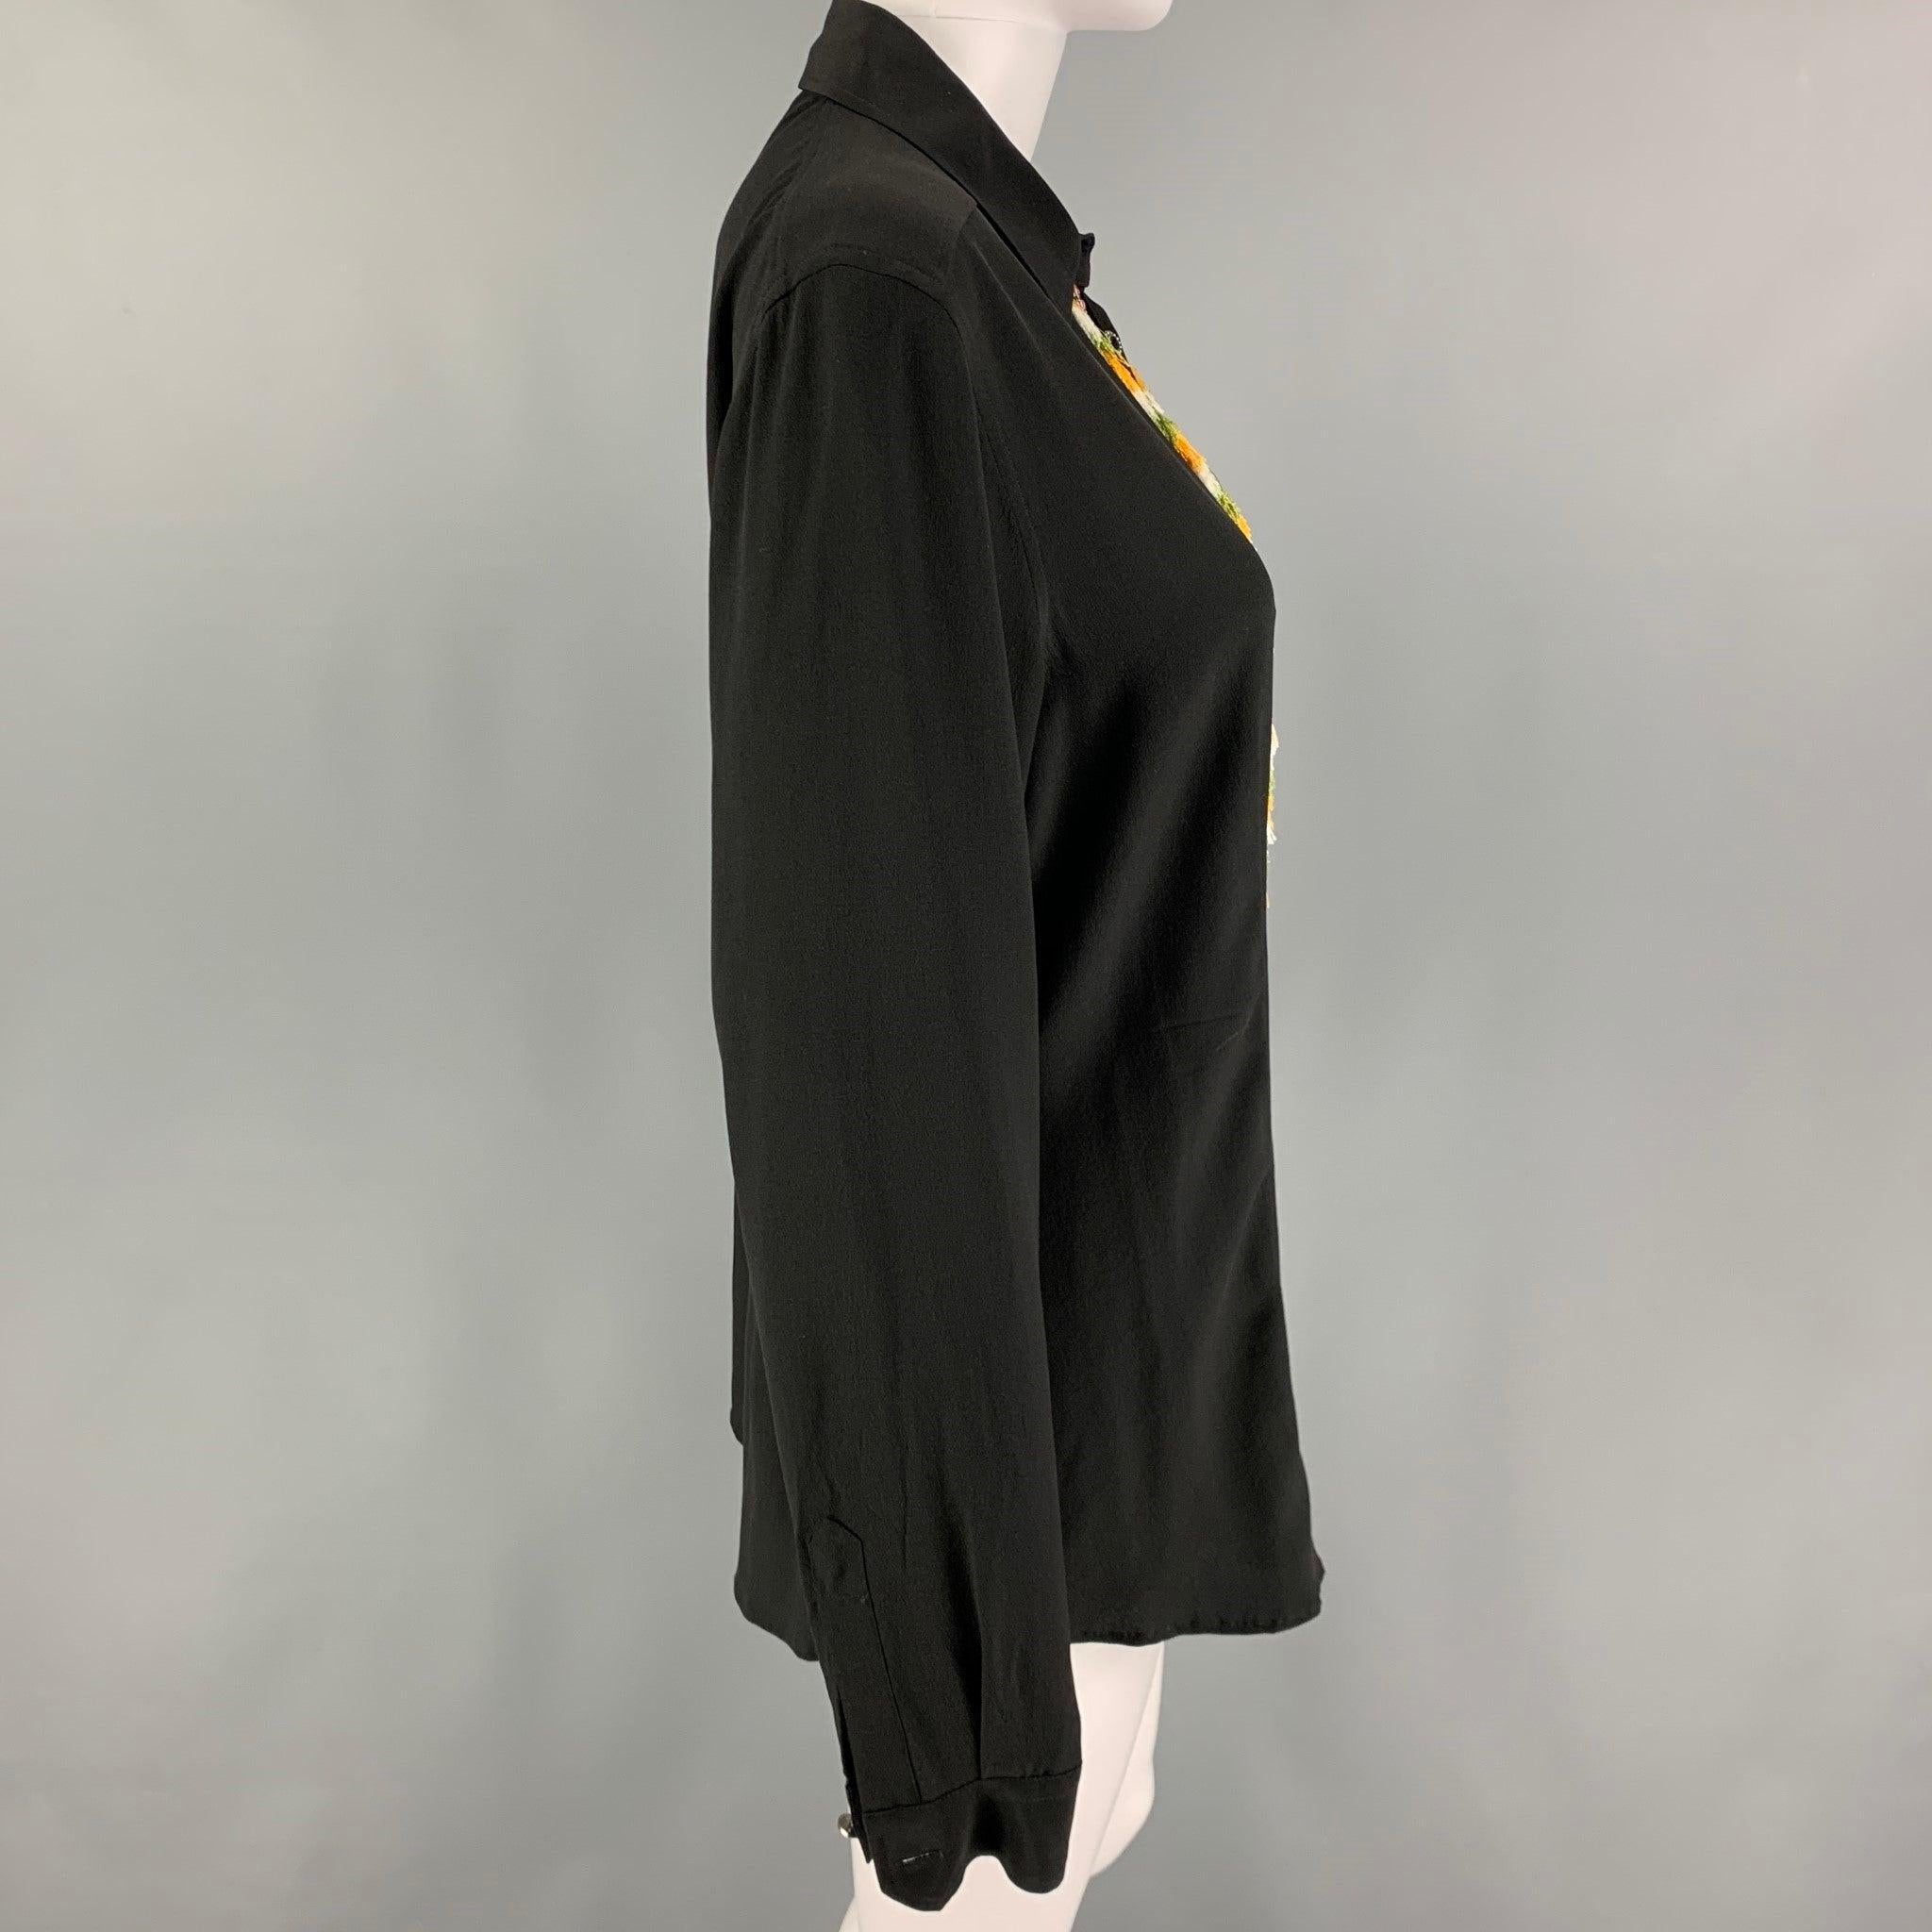 ETRO shirt comes in a black silk featuring a multi-color embroidered design, fringe trim, spread collar, and a button up closure. Includes tags. Made in Italy.
Excellent
Pre-Owned Condition. Missing single button. As-is.  

Marked:   46